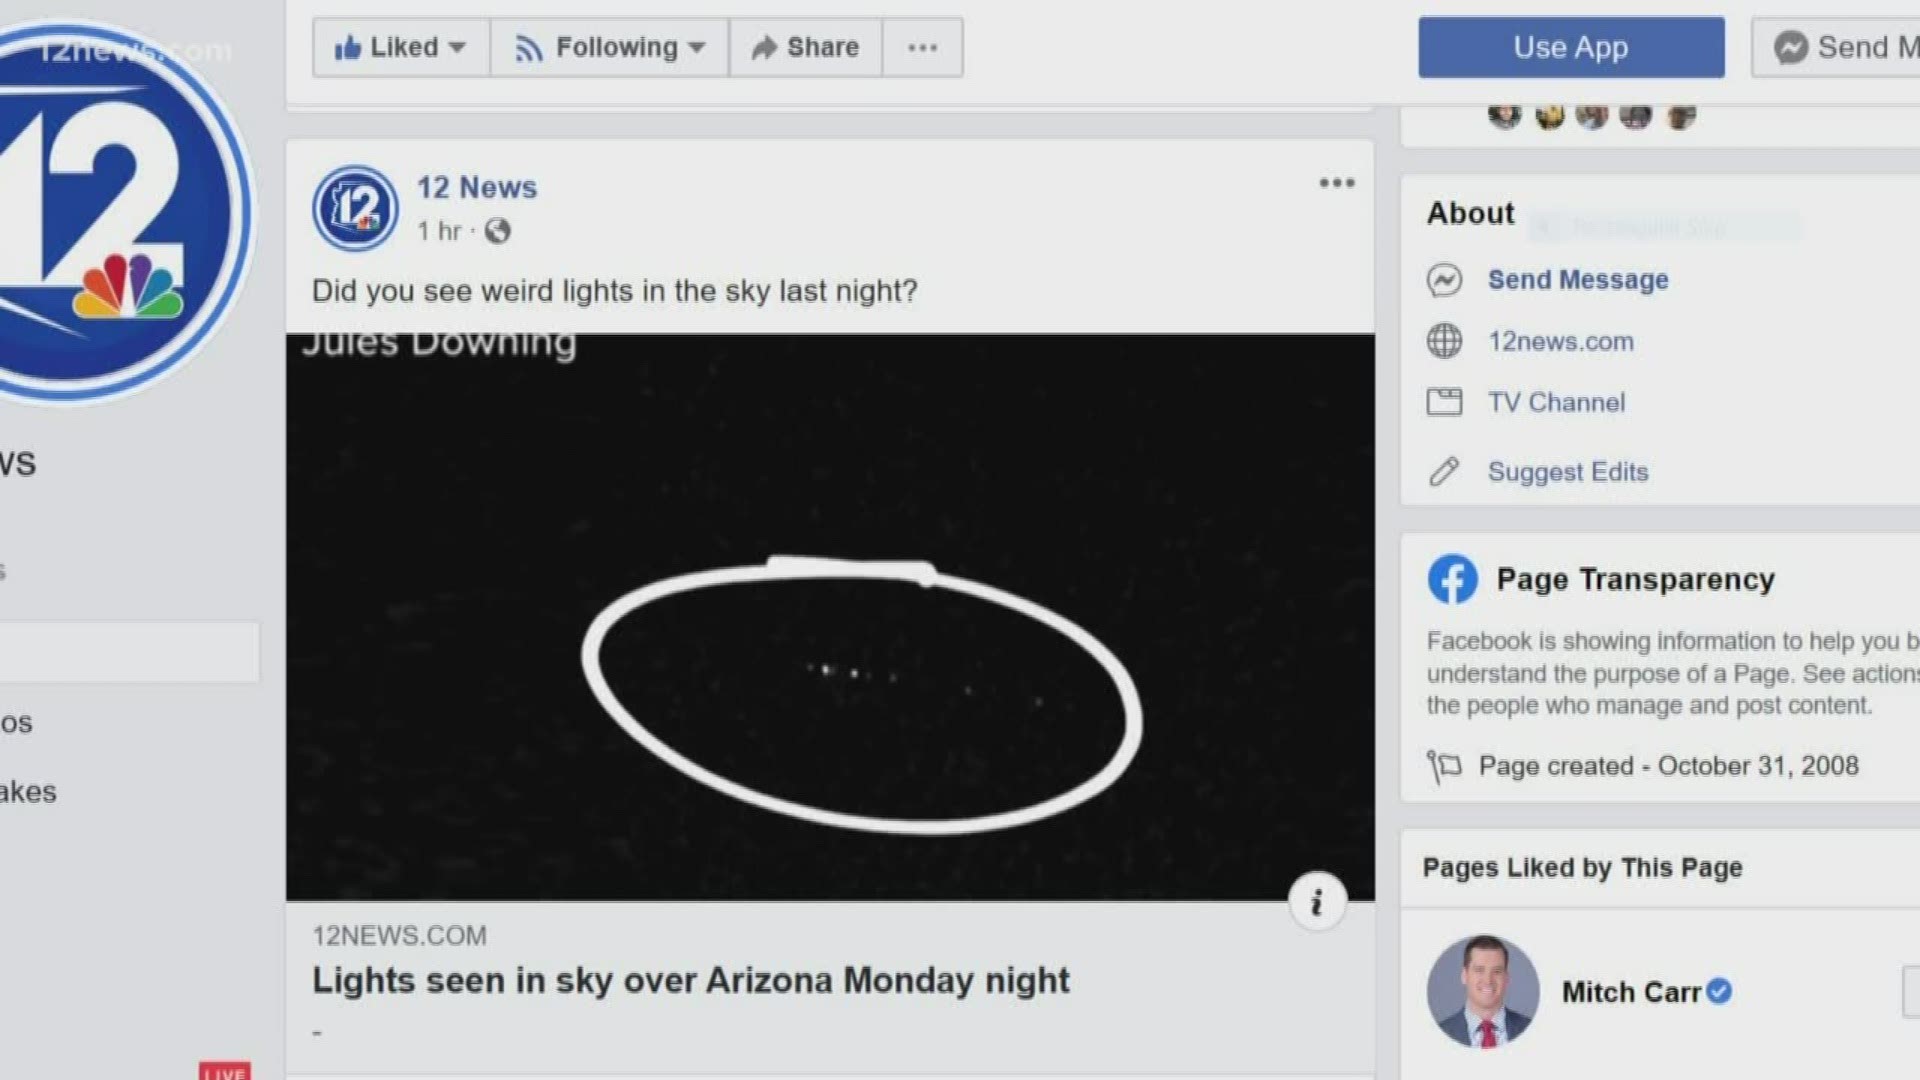 Strange lights were spotted over the West Valley Monday night. Several theories include: light from a SpaceX launch, a meteor shower or maybe aliens!